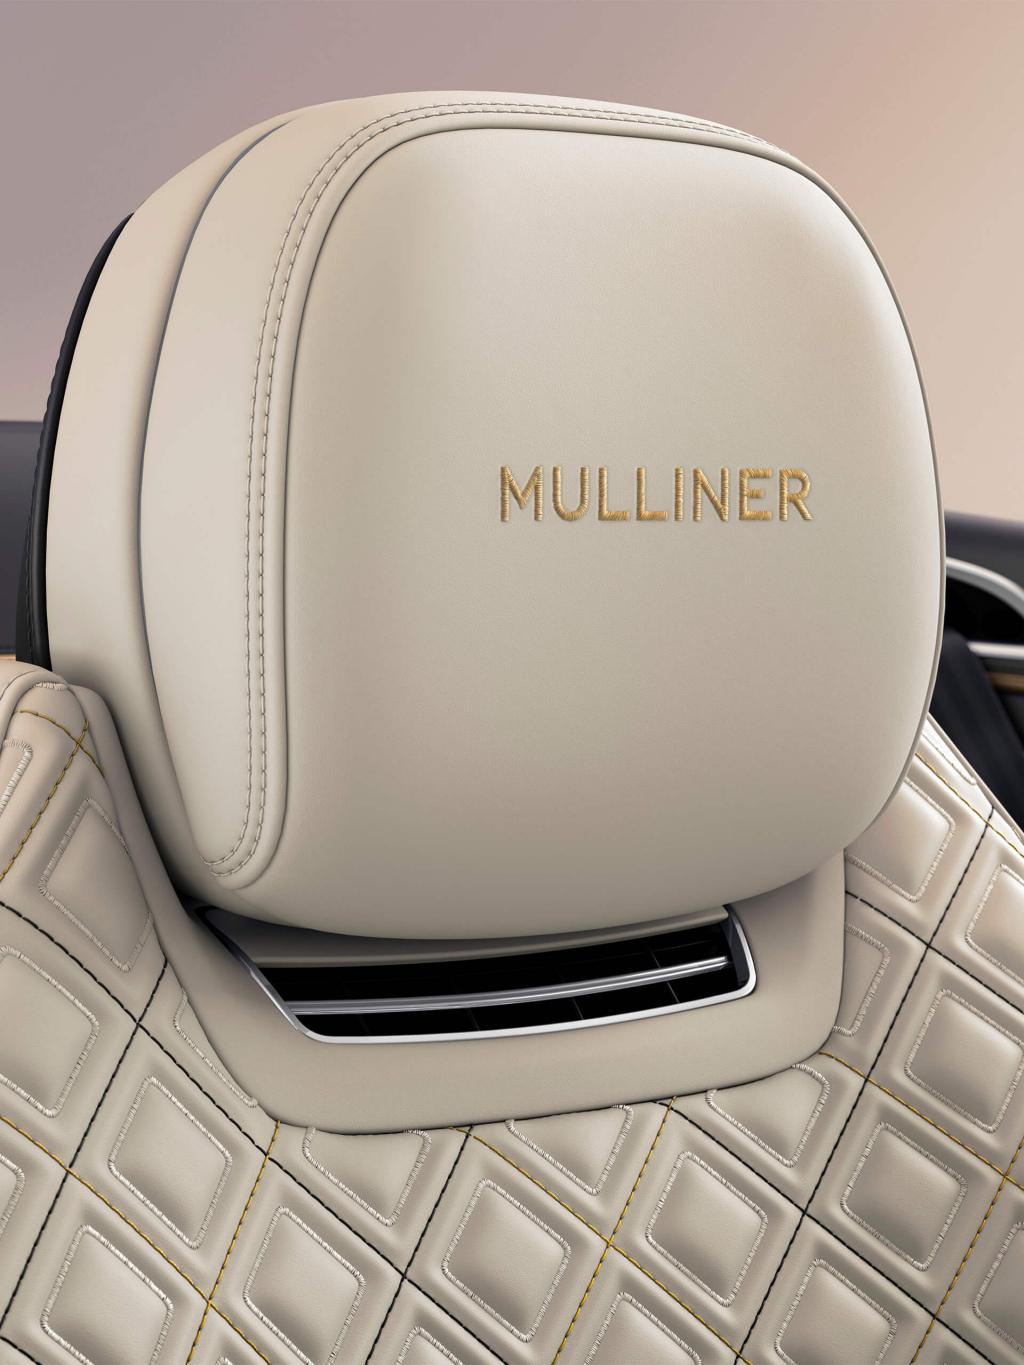 "Front seat view of Bentley Continental GTC Mulliner in Linen Hide and Embroidered Mulliner Emblems. "